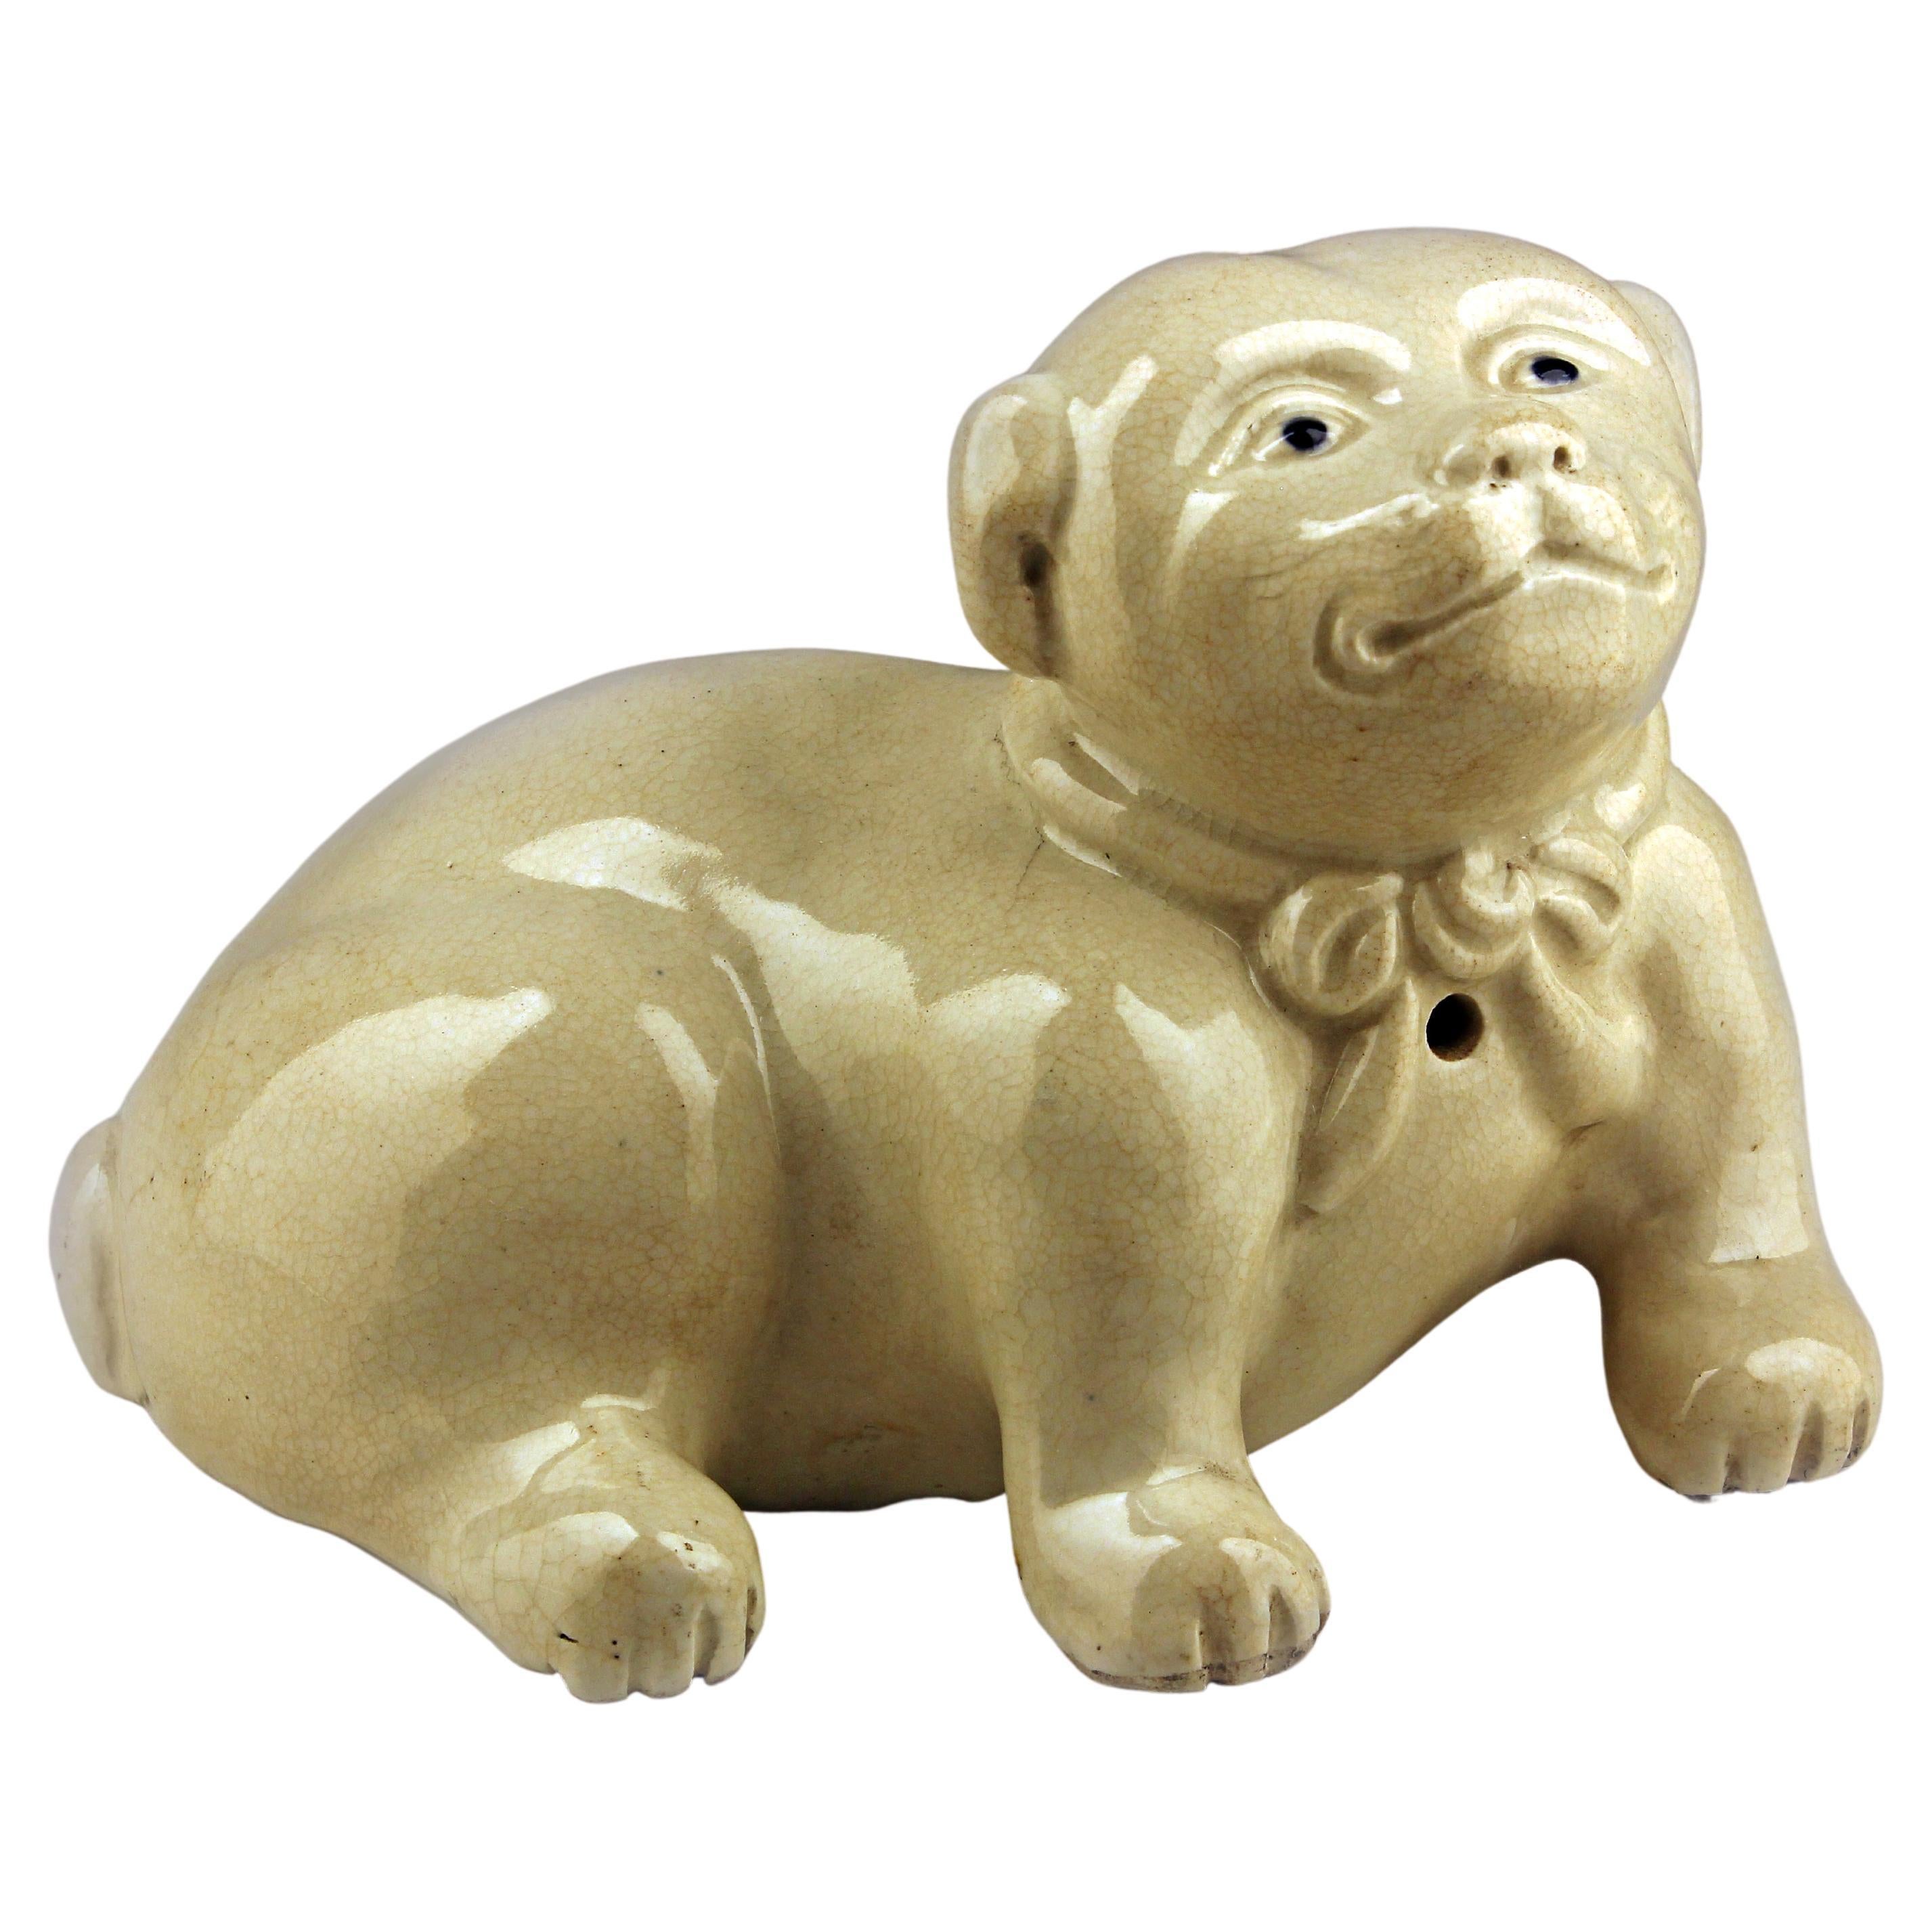 Late 18th Century/Edo-Meiji Period Japanese Glazed Porcelain Sculpture of a Dog For Sale